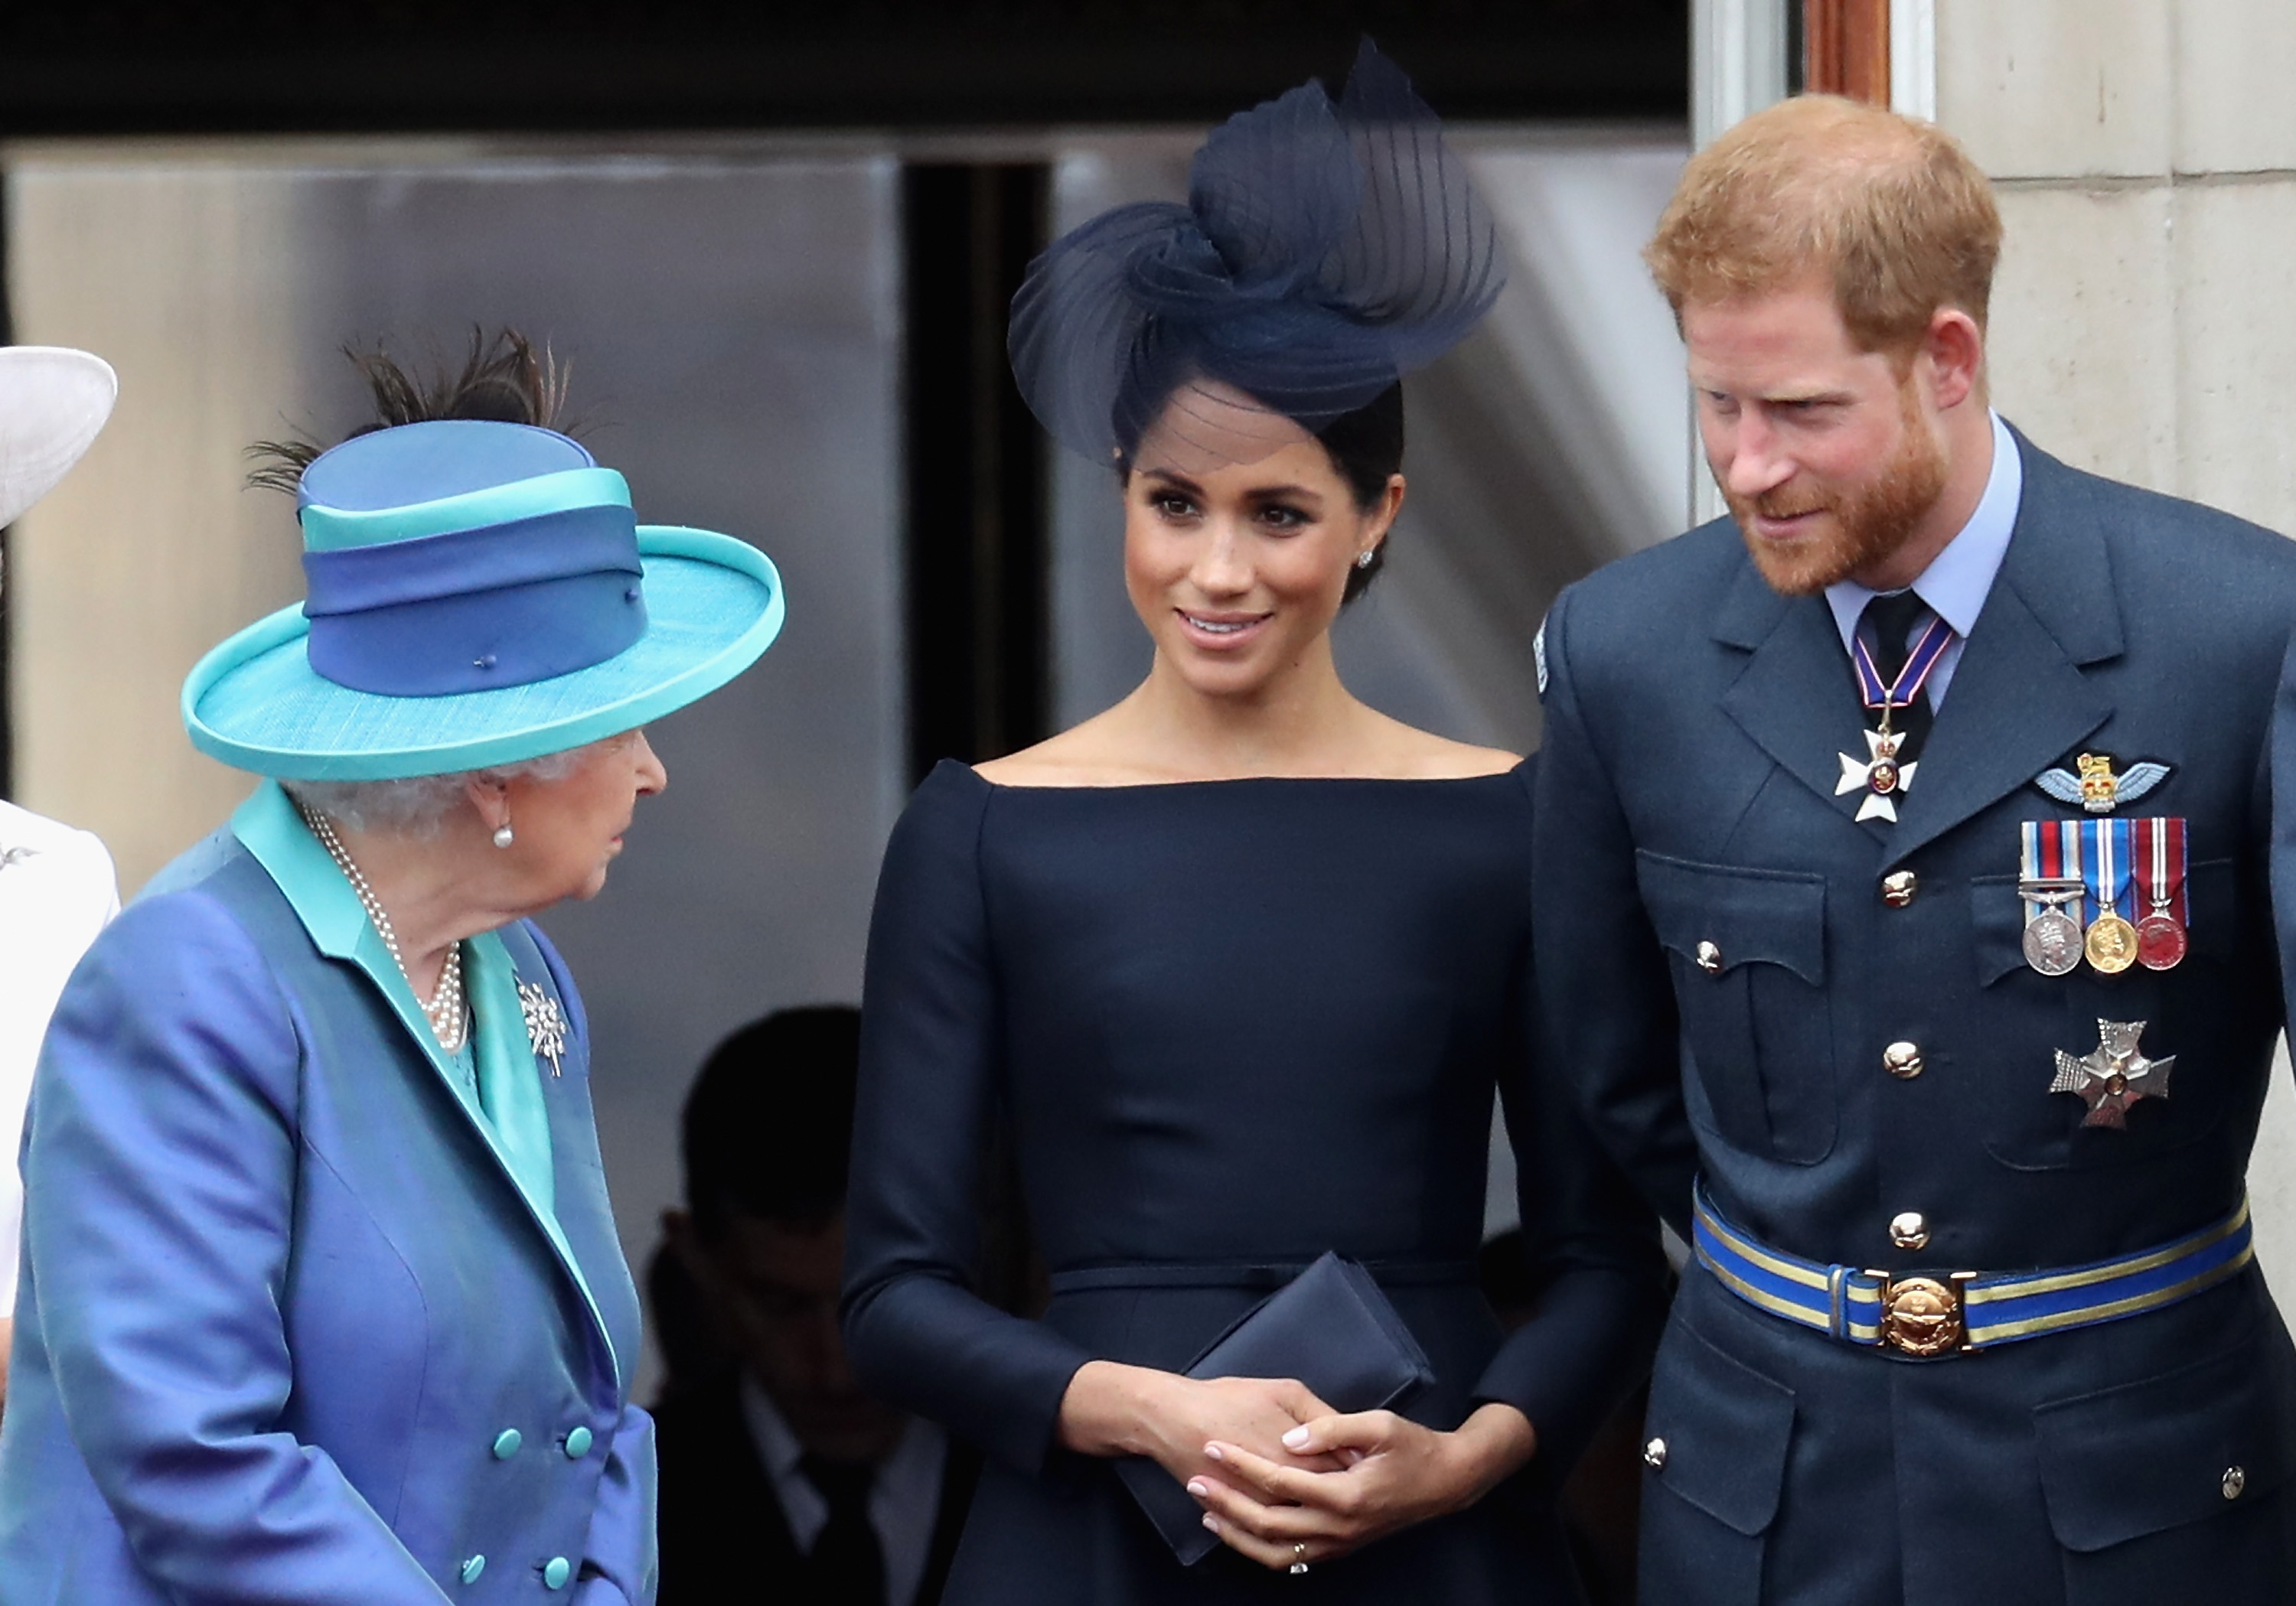 Queen Elizabeth II, Meghan Markle, and Prince Harry mark the Centenary of the RAF in 2018